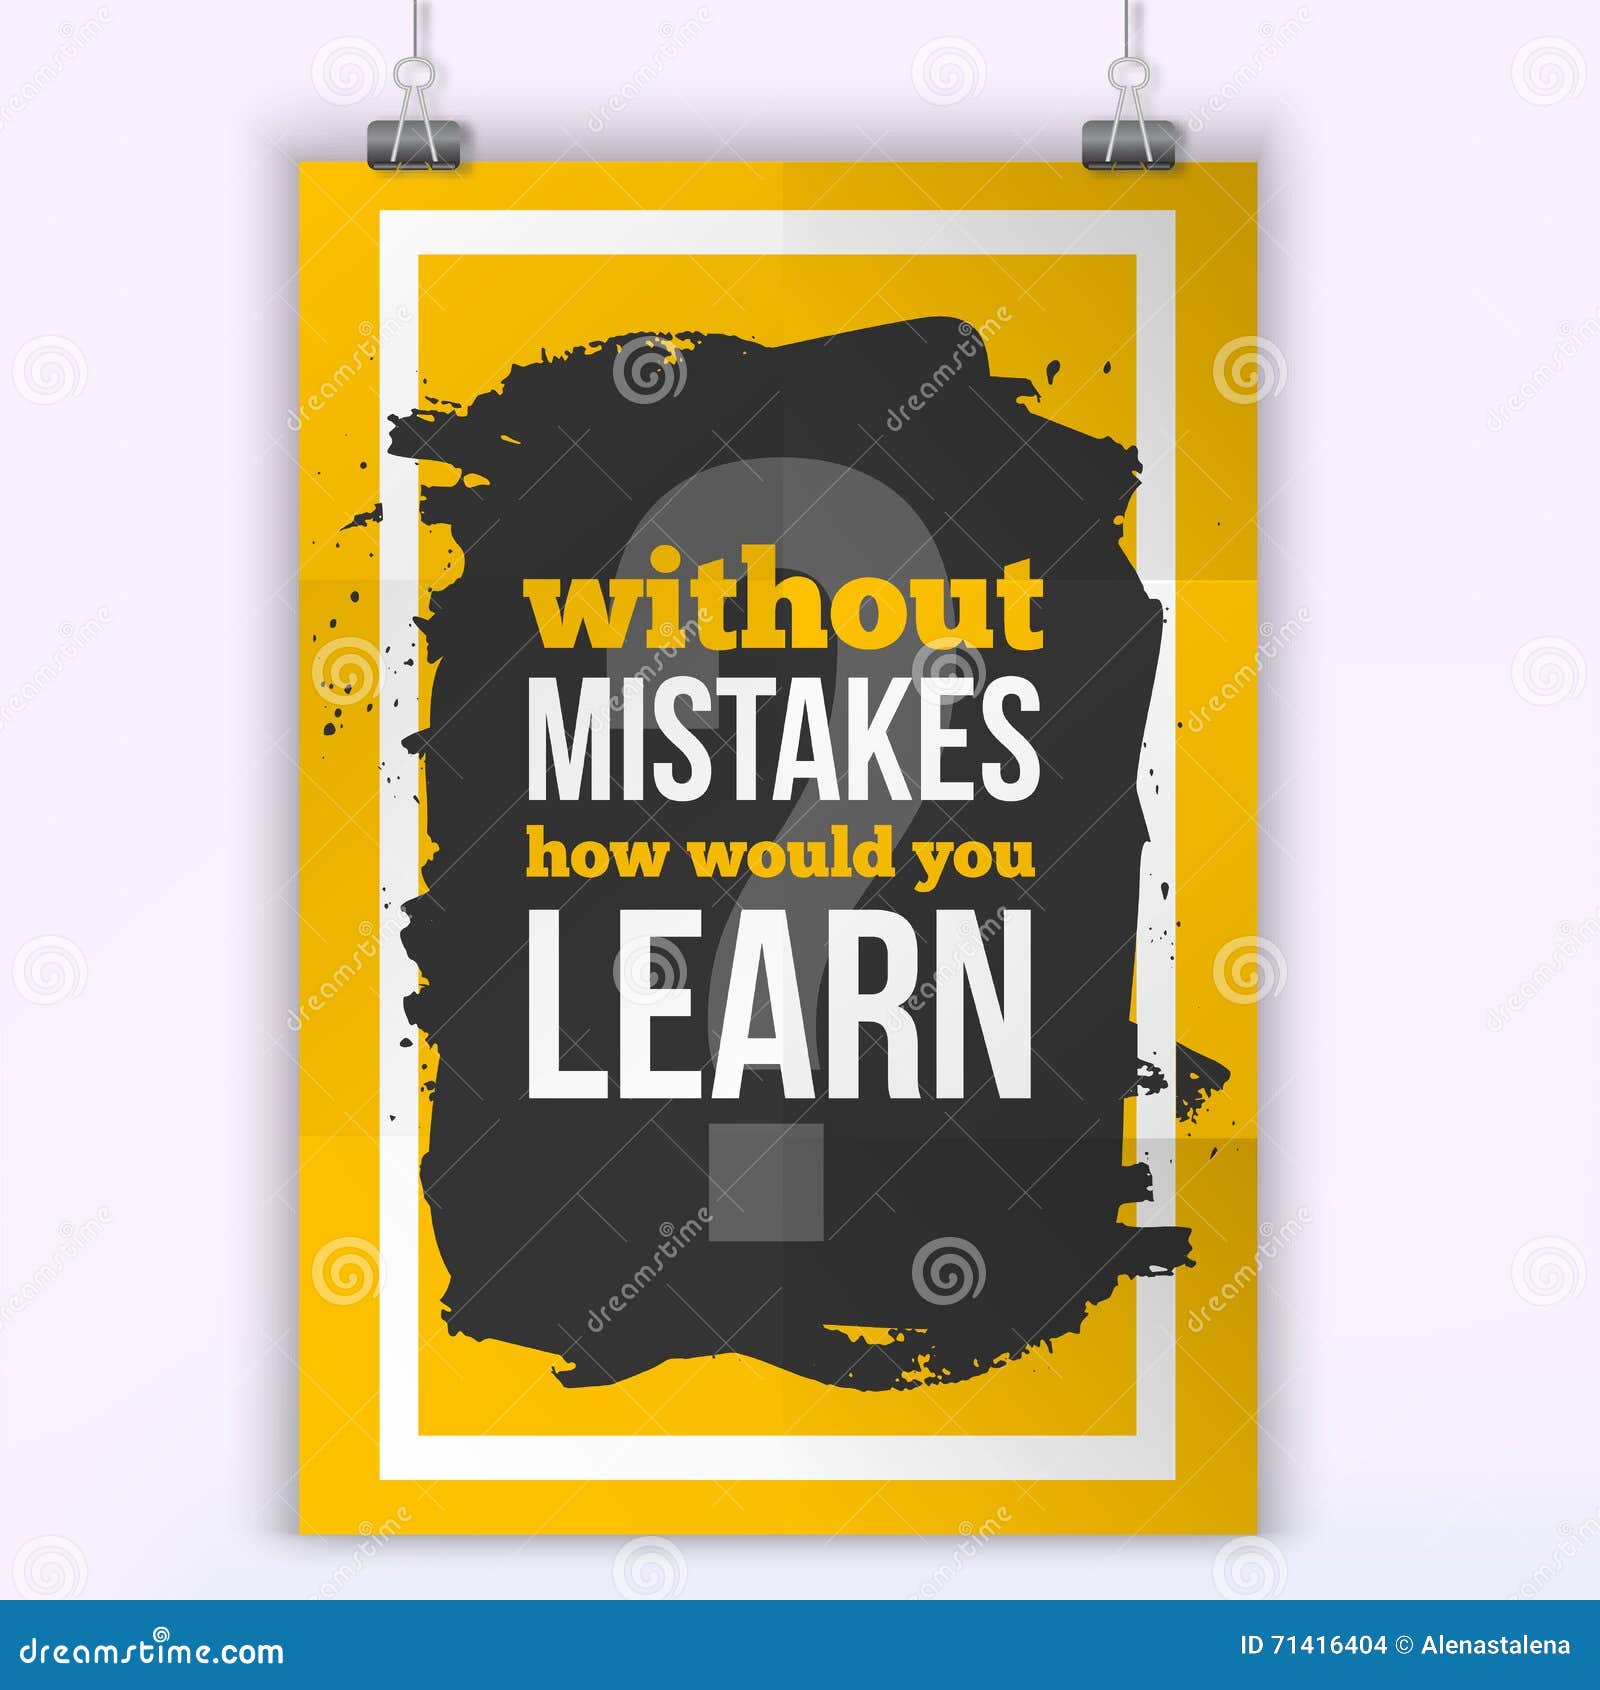 motivational quote without mistakes how would you learn. work quote poster on colorful background. inspiration